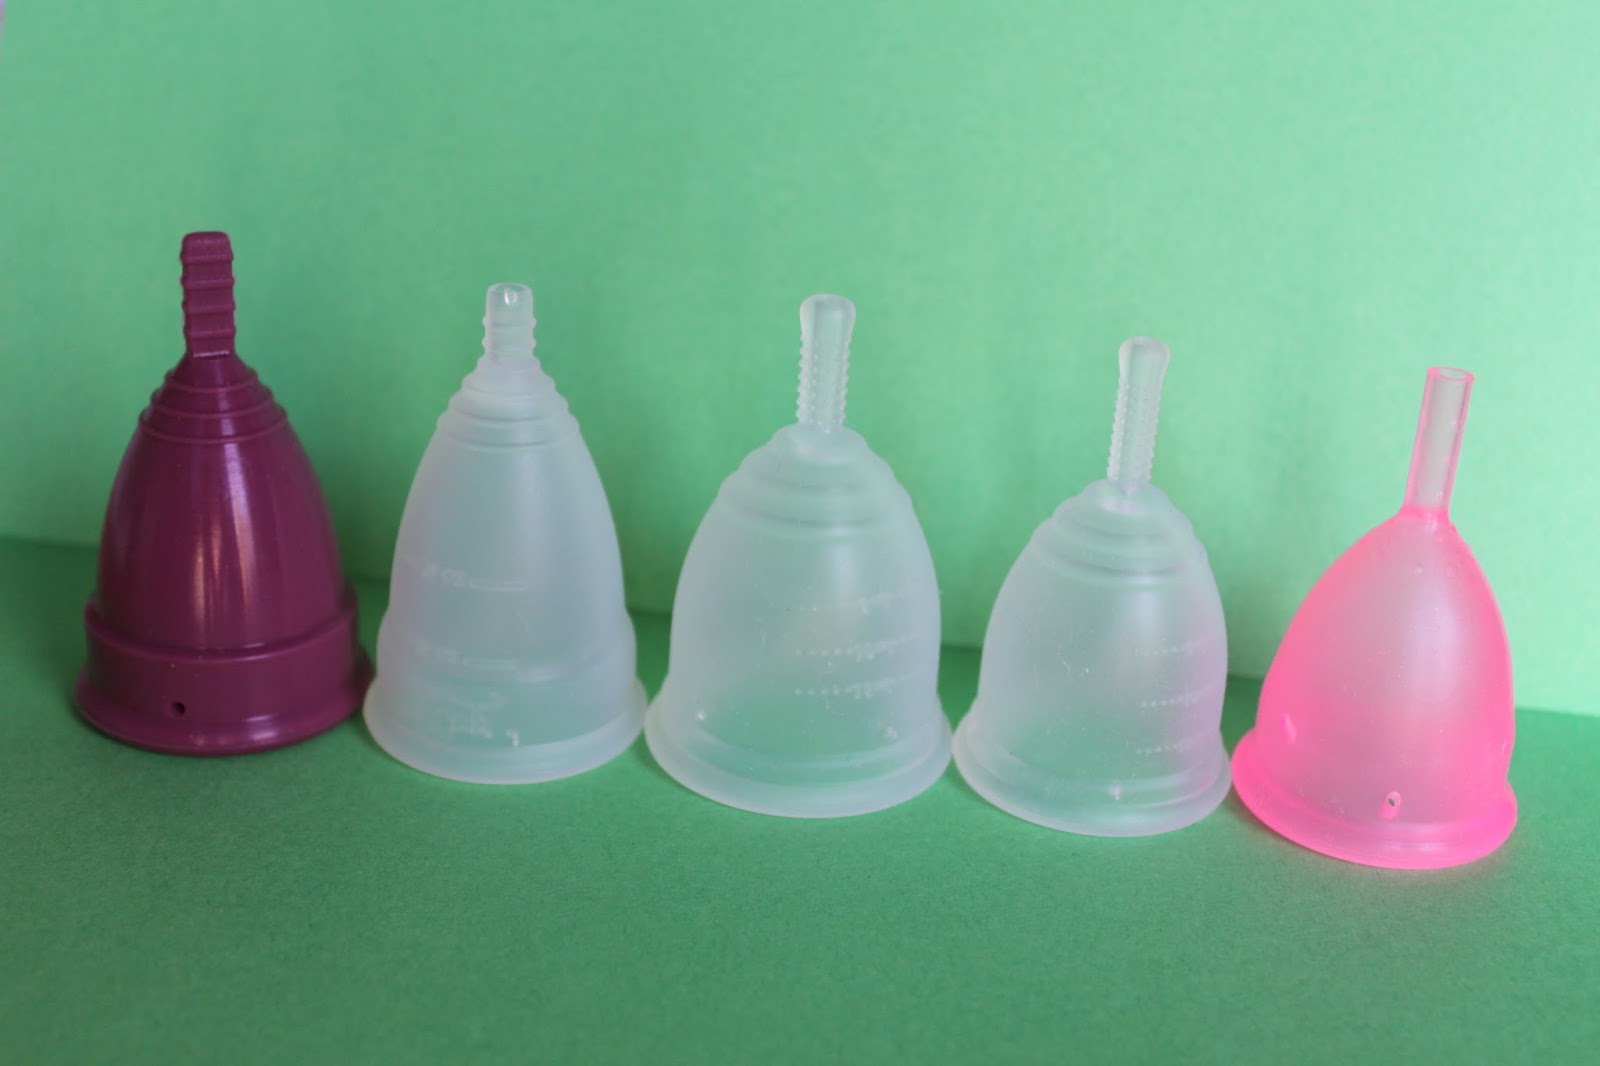 ALL FUNCTIONAL & PRACTICAL: Mia cup vs. cup vs. Ruby cup vs. Lady cup Menstrual Cup Reviews!